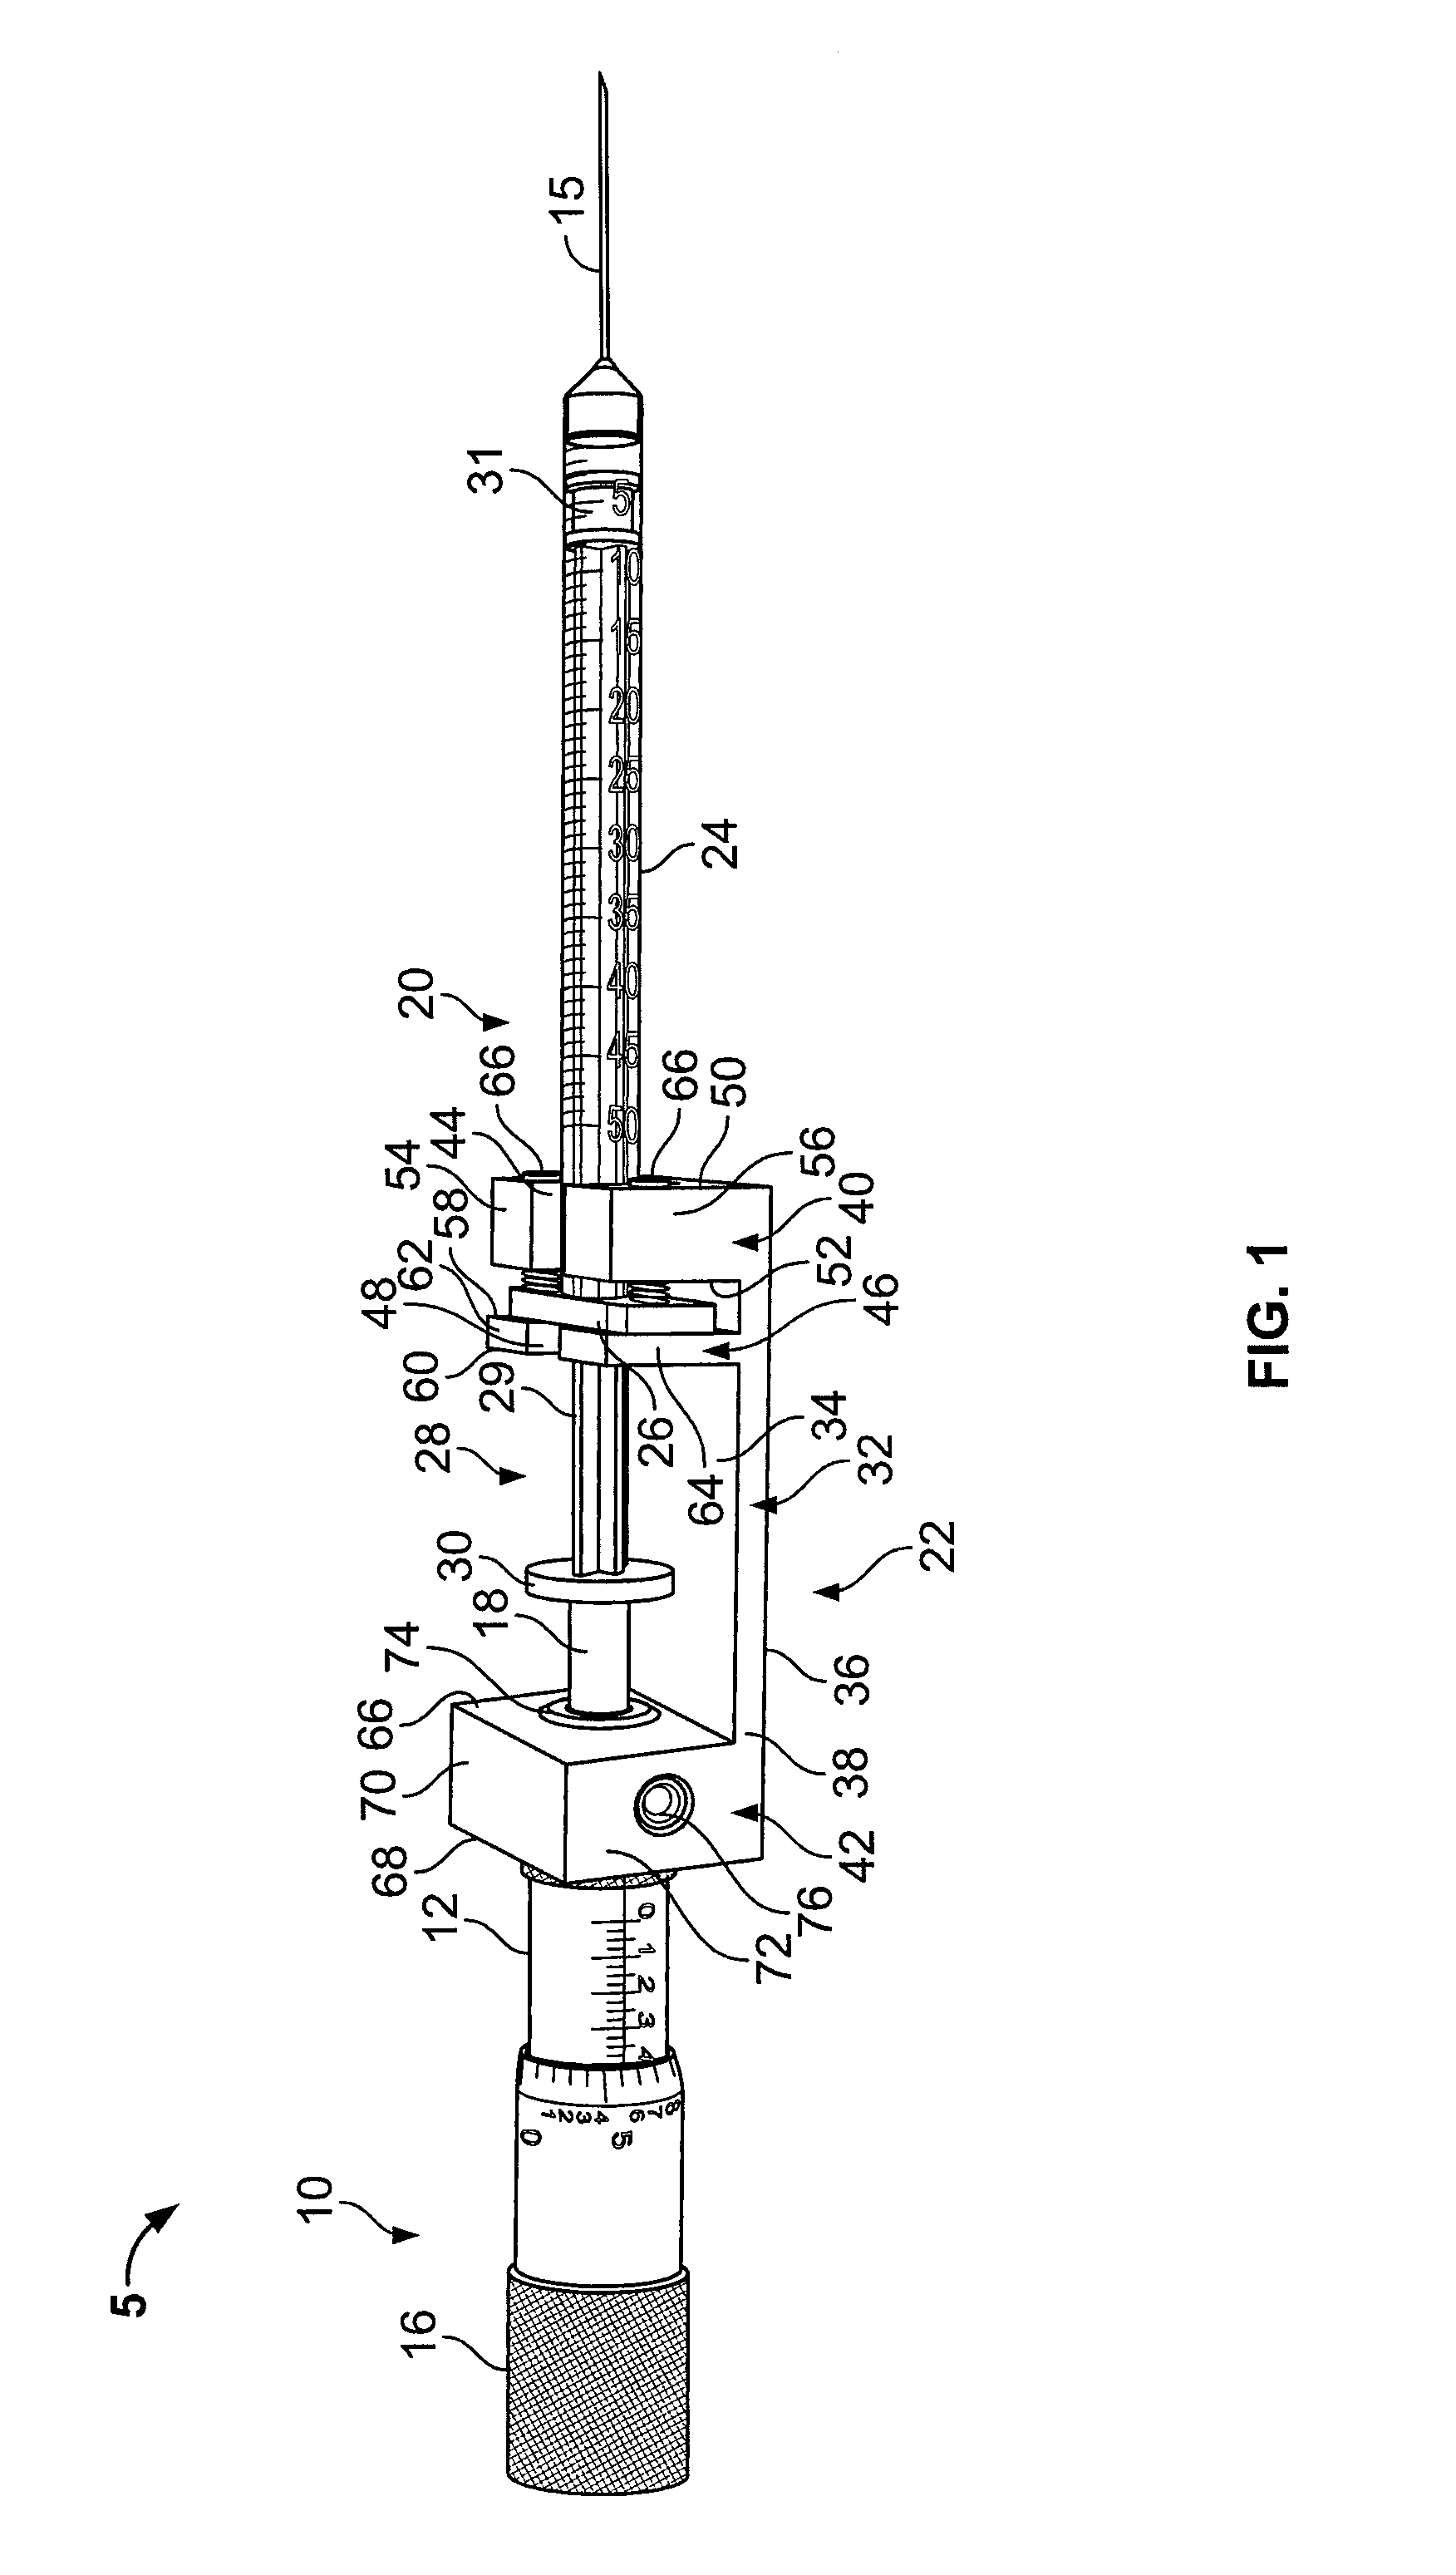 Apparatus and methods for delivering fluid and material to a subject